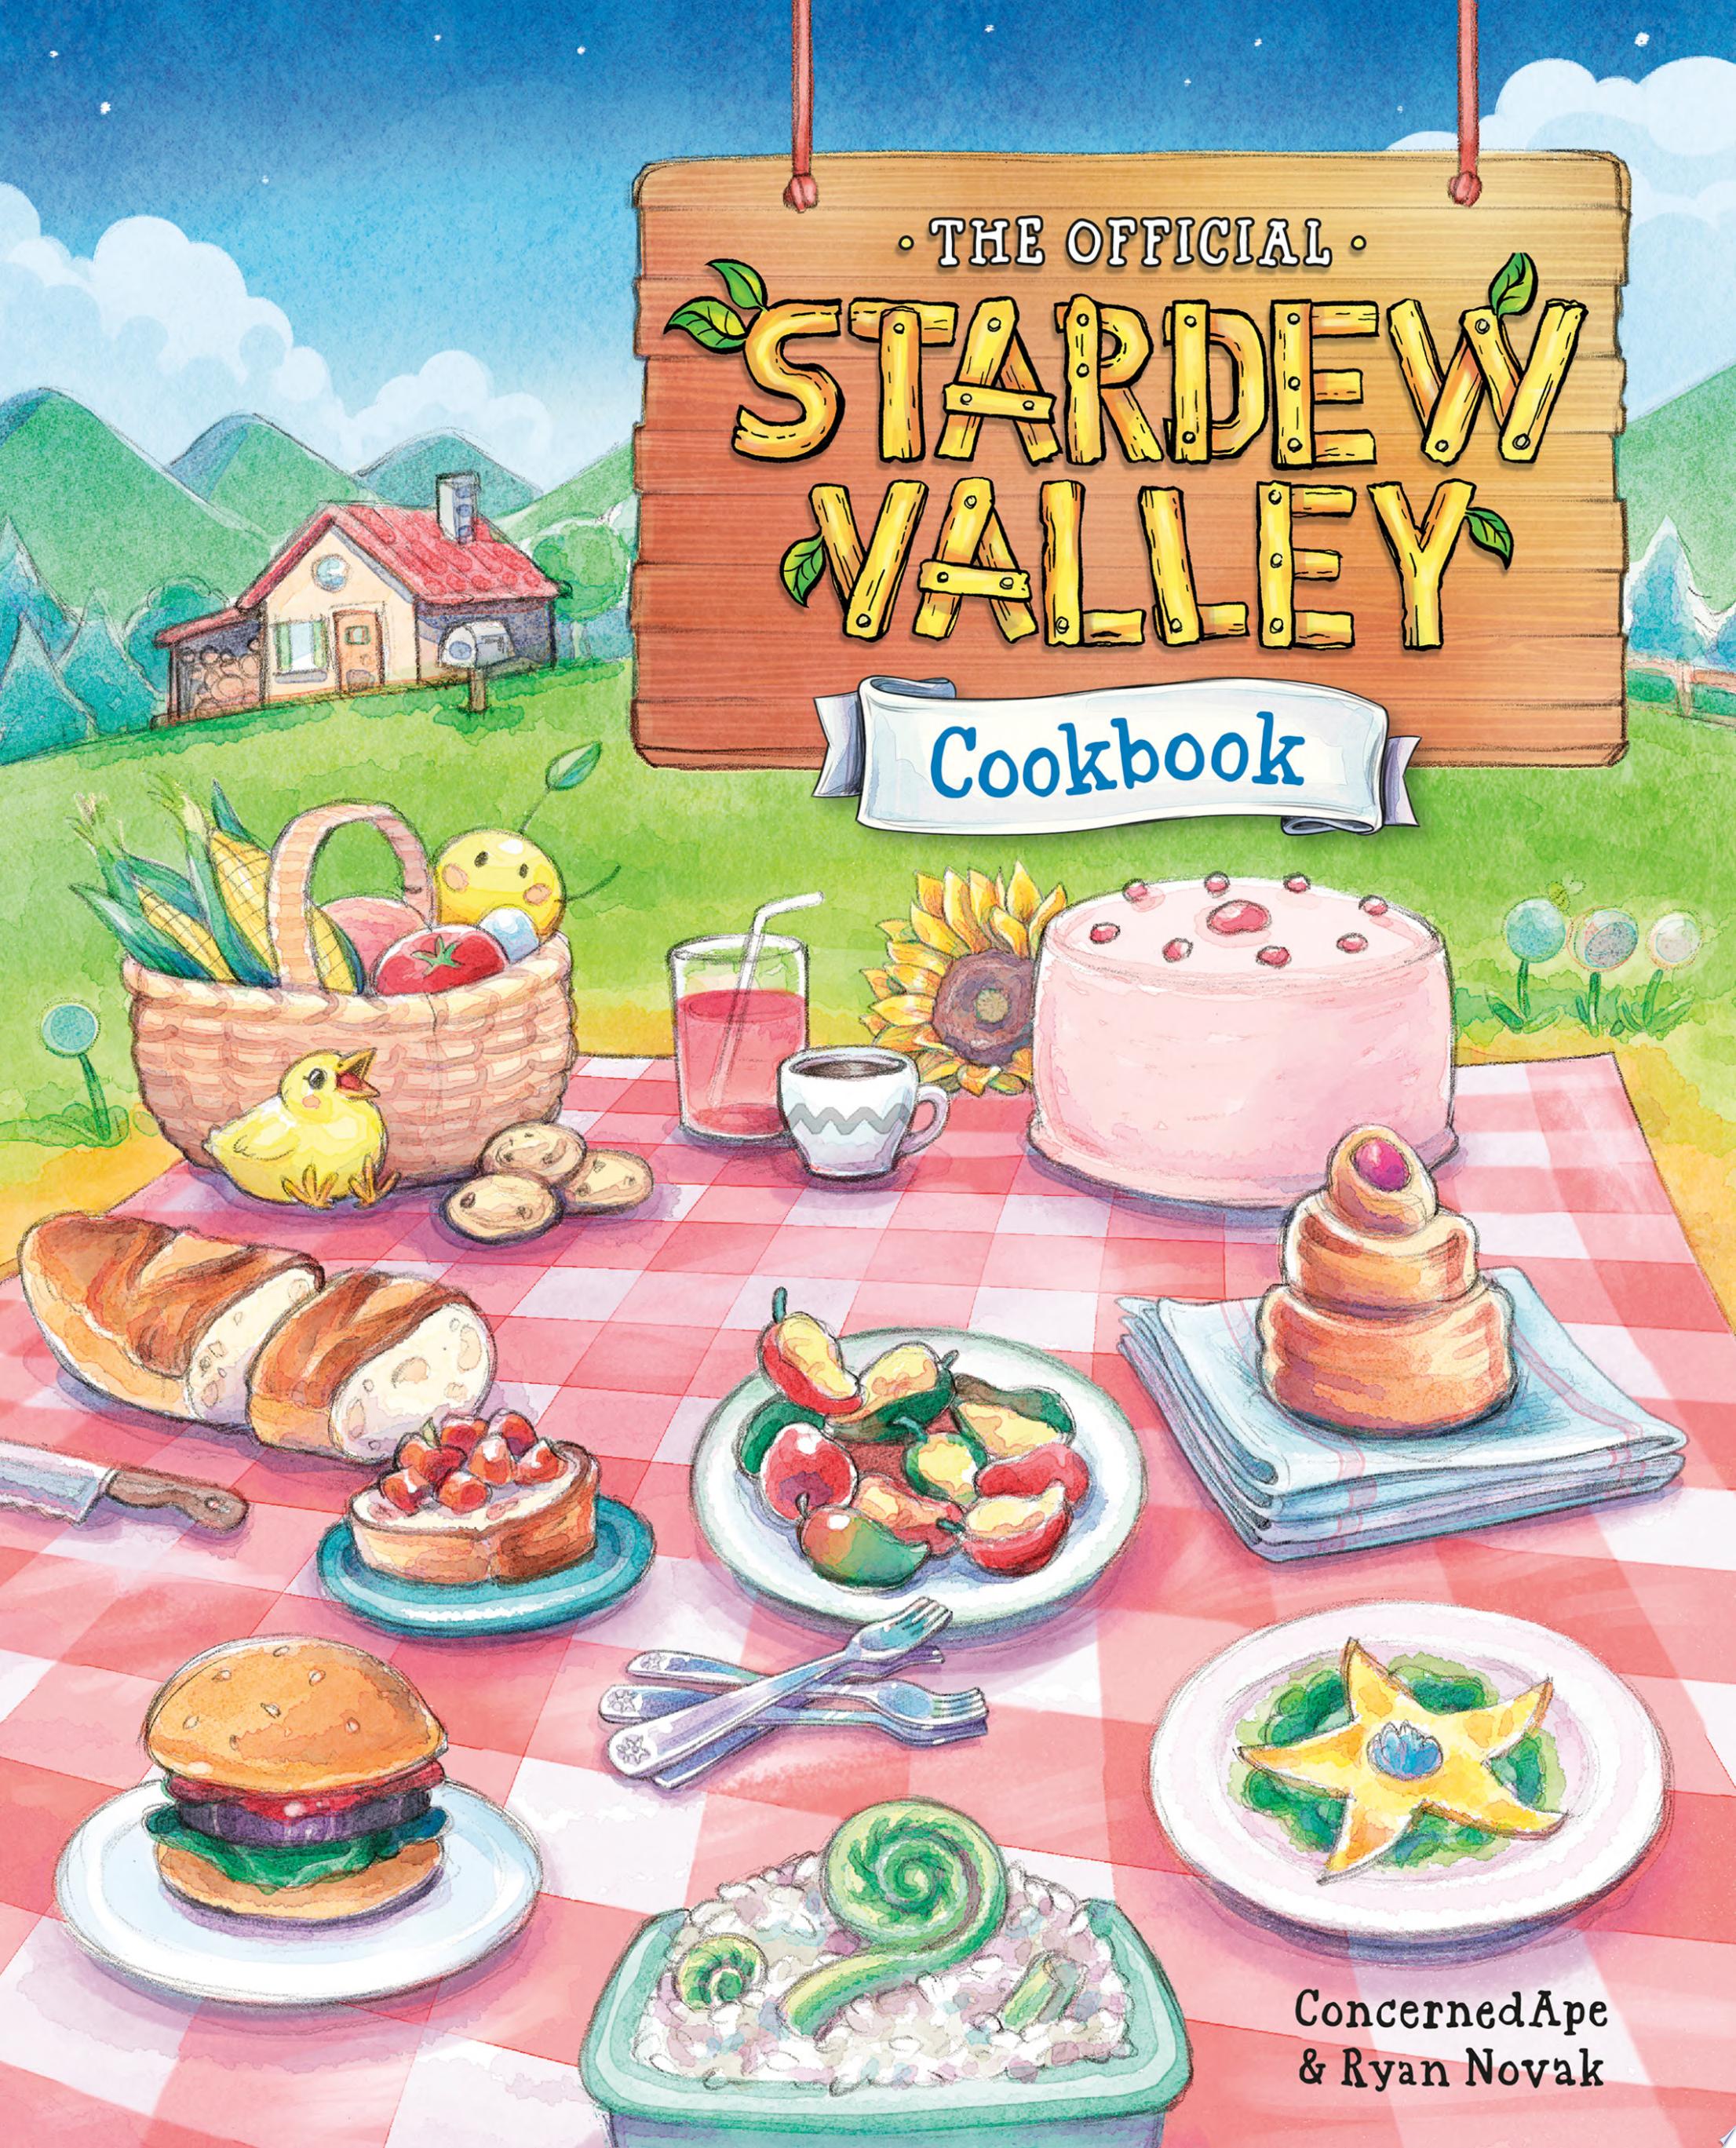 Image for "The Official Stardew Valley Cookbook"